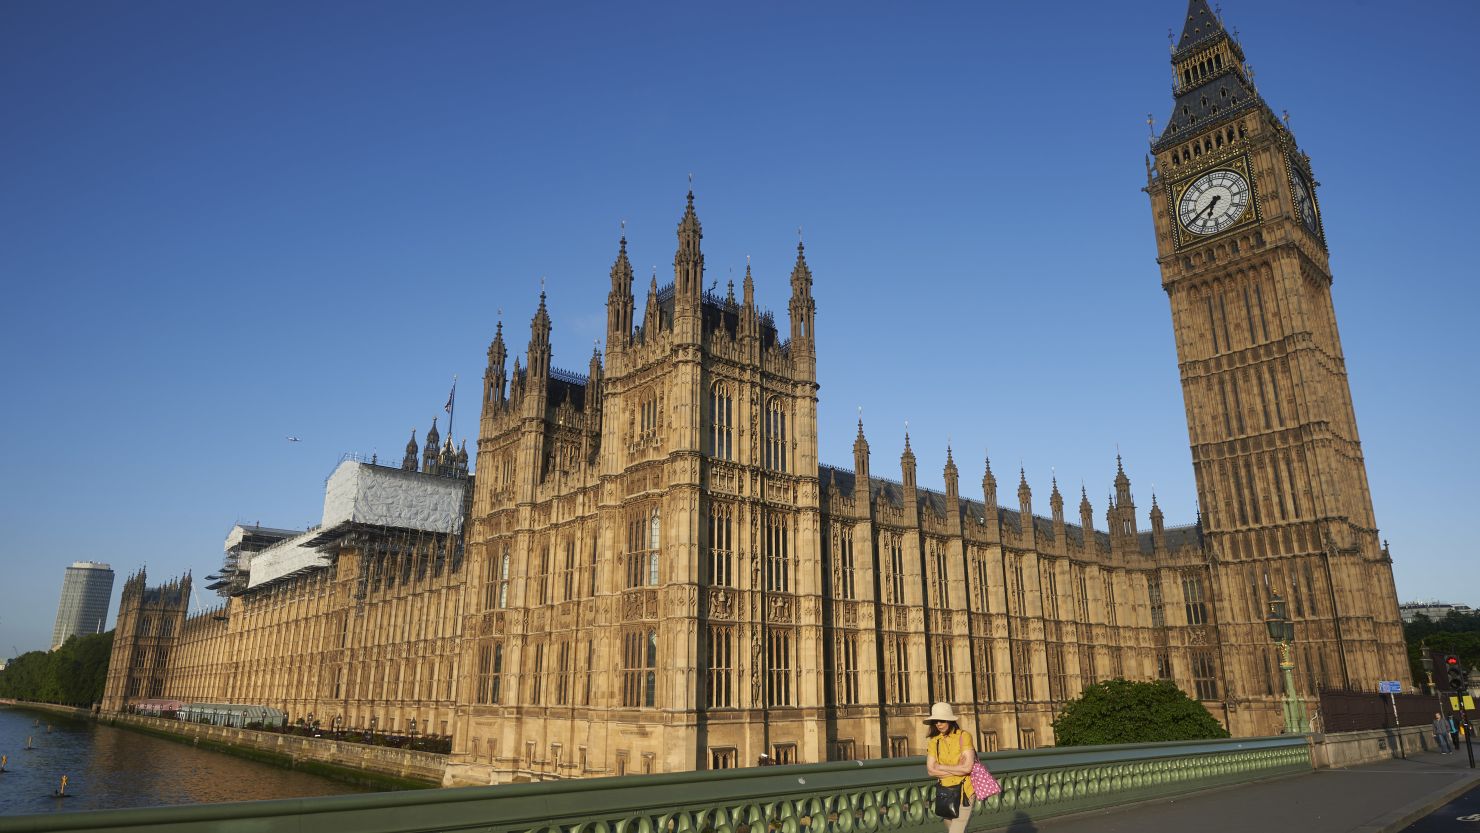 The Houses of Parliament were hit by a cyberattack, a spokesperson said.